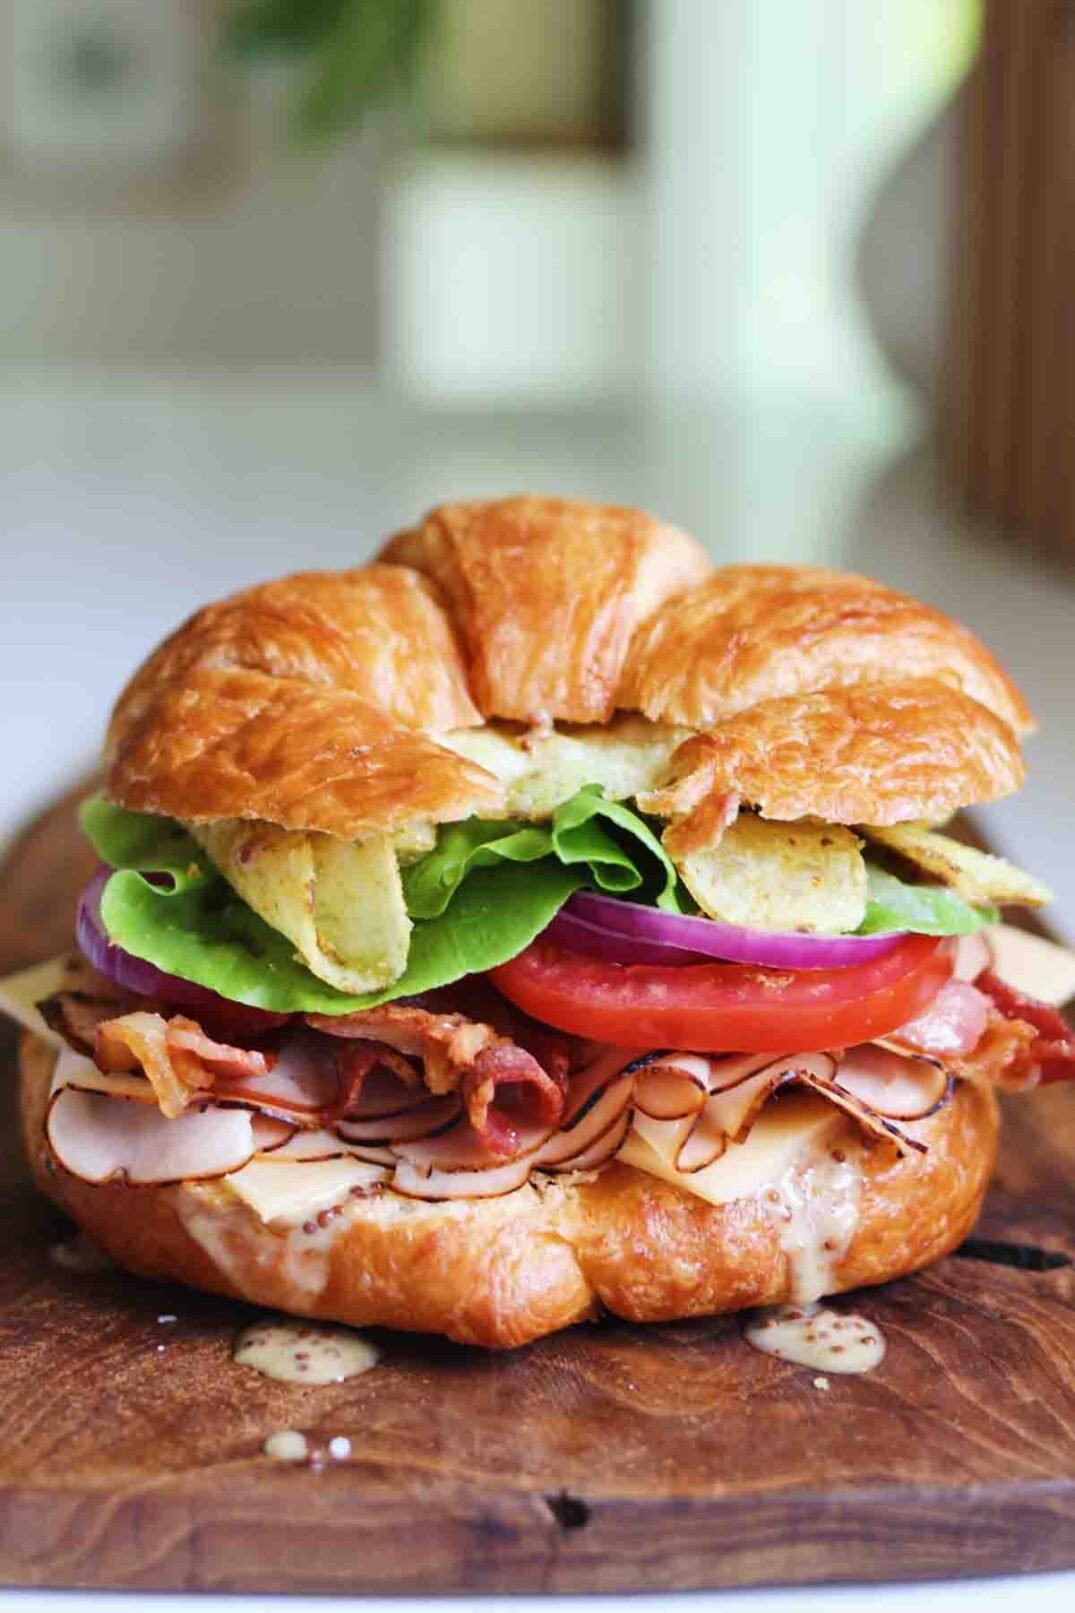 a croissant loaded with turkey, bacon, veggies and honey mustard.